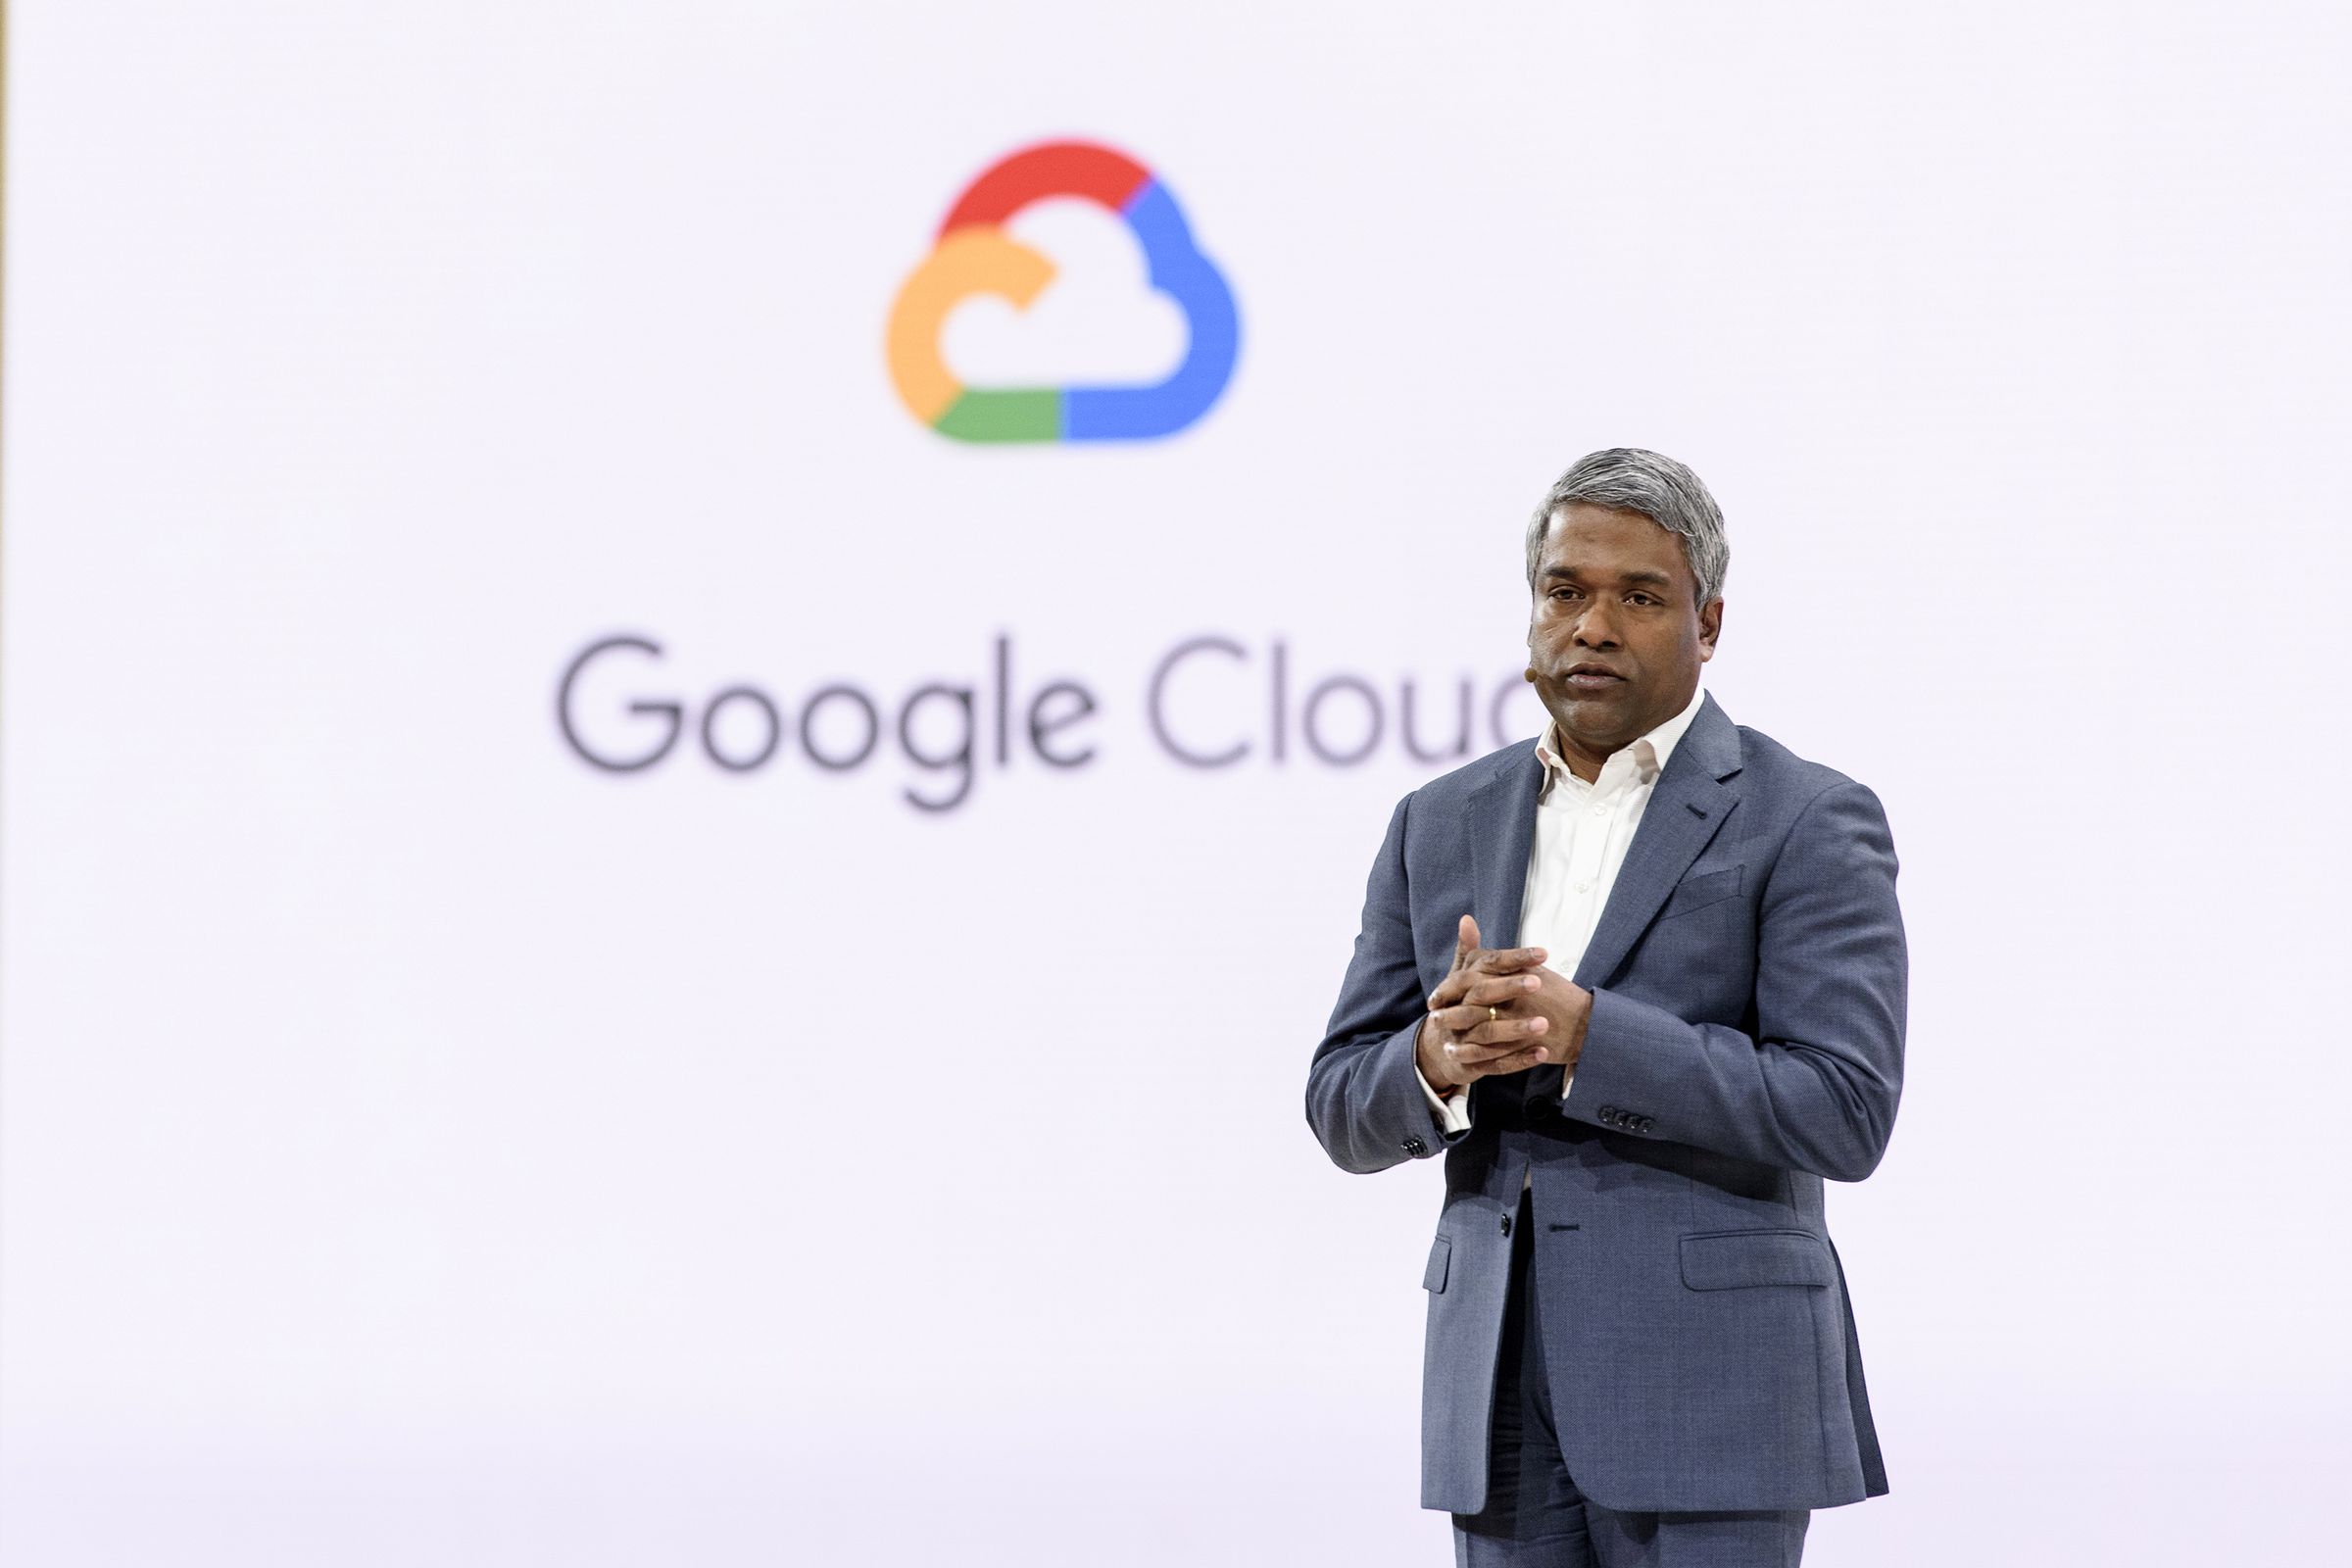 Key Speakers At Google Cloud Next ‘19 Conference